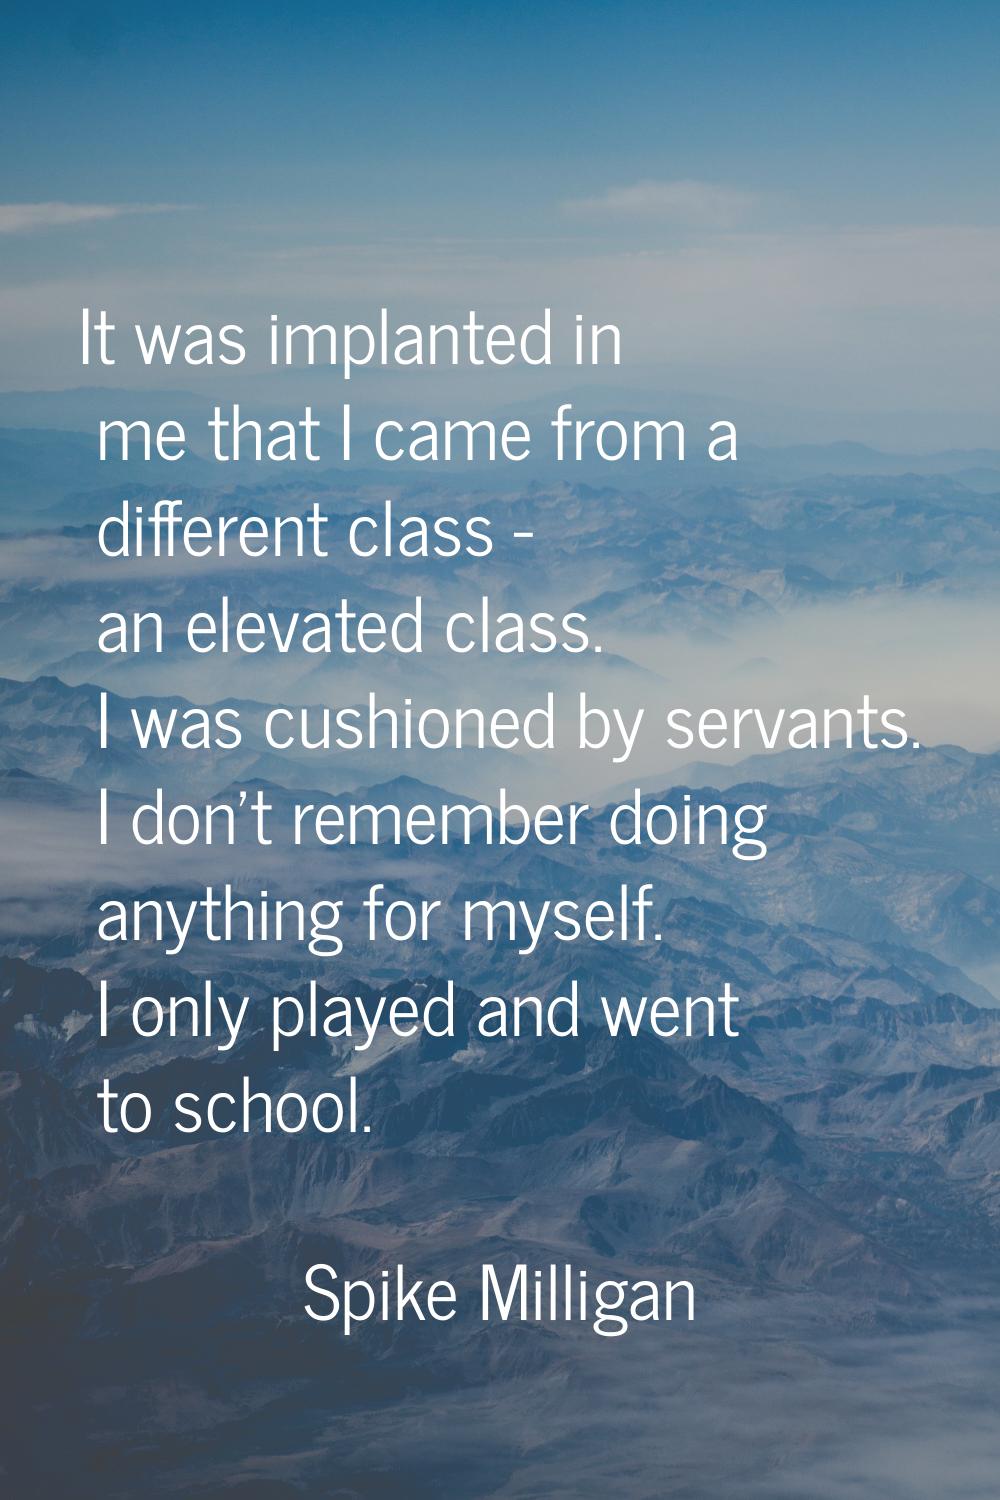 It was implanted in me that I came from a different class - an elevated class. I was cushioned by s